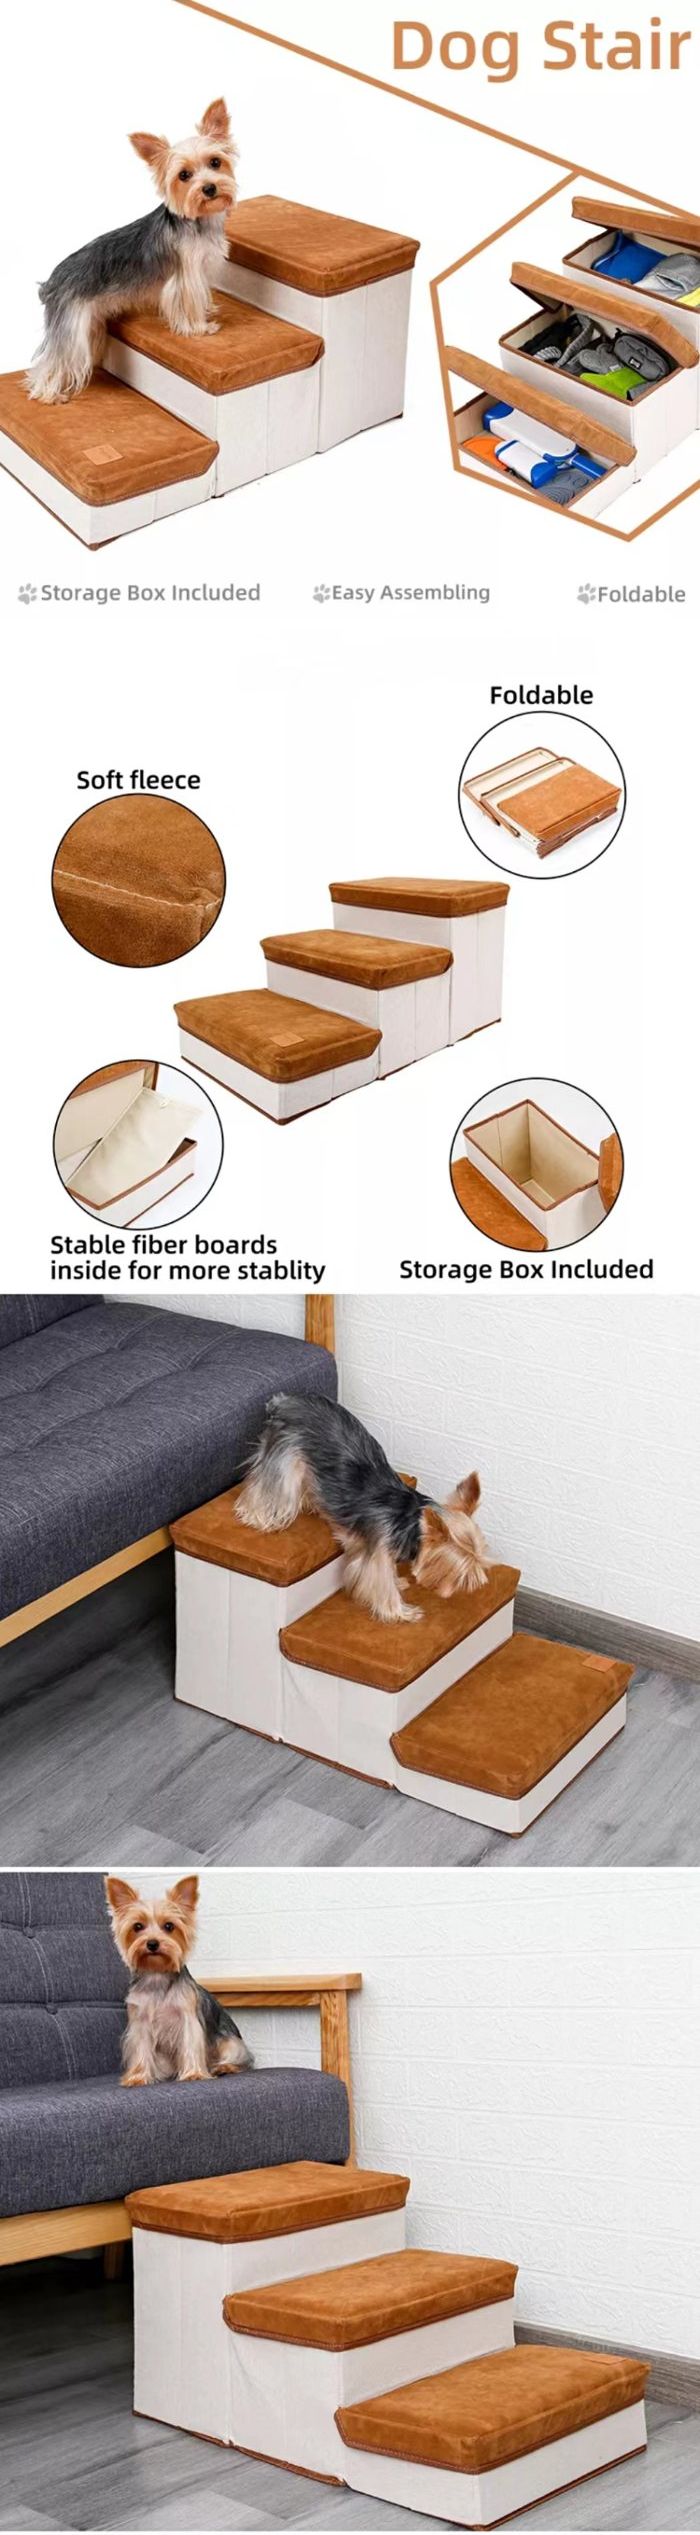 3 Layers Foldable Dog Step/ Pet Stairs With Storage Box